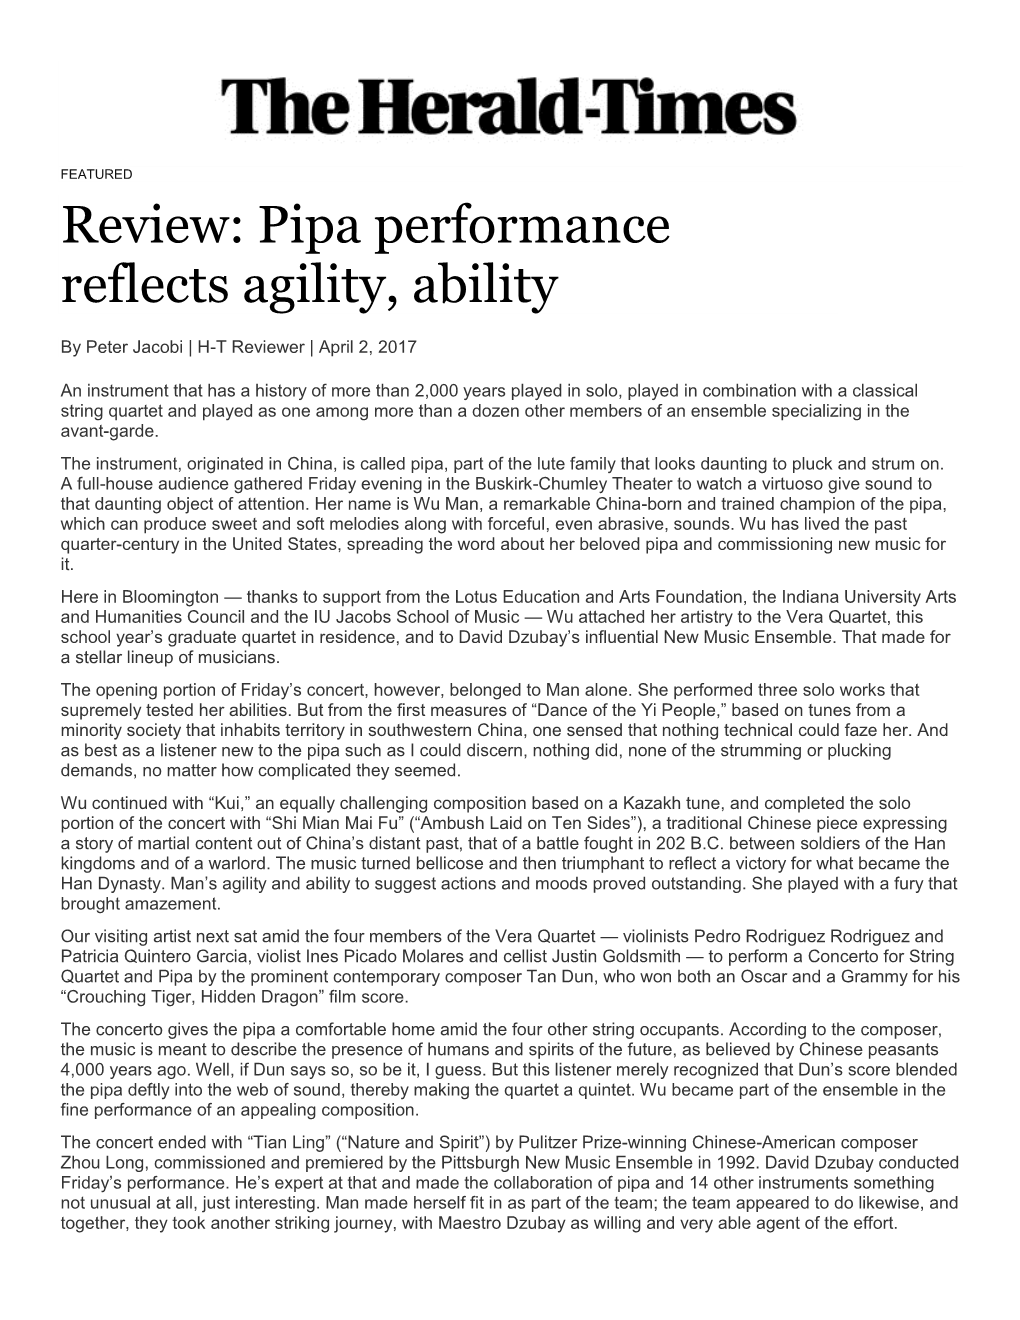 Pipa Performance Reflects Agility, Ability